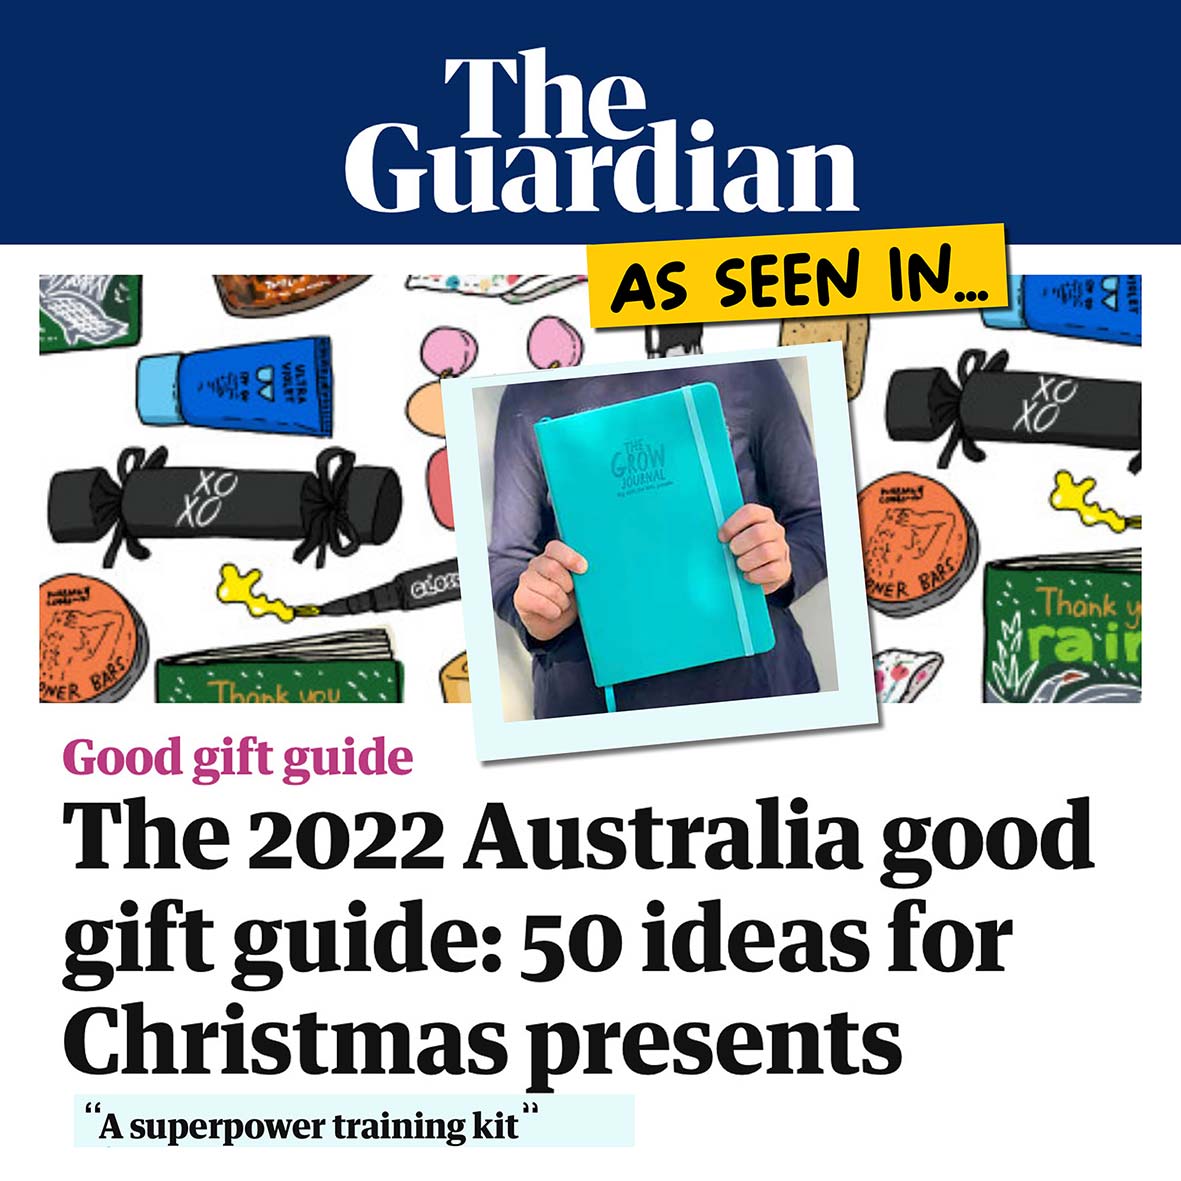 Kids Gratitude Journals as featured in the Guardian